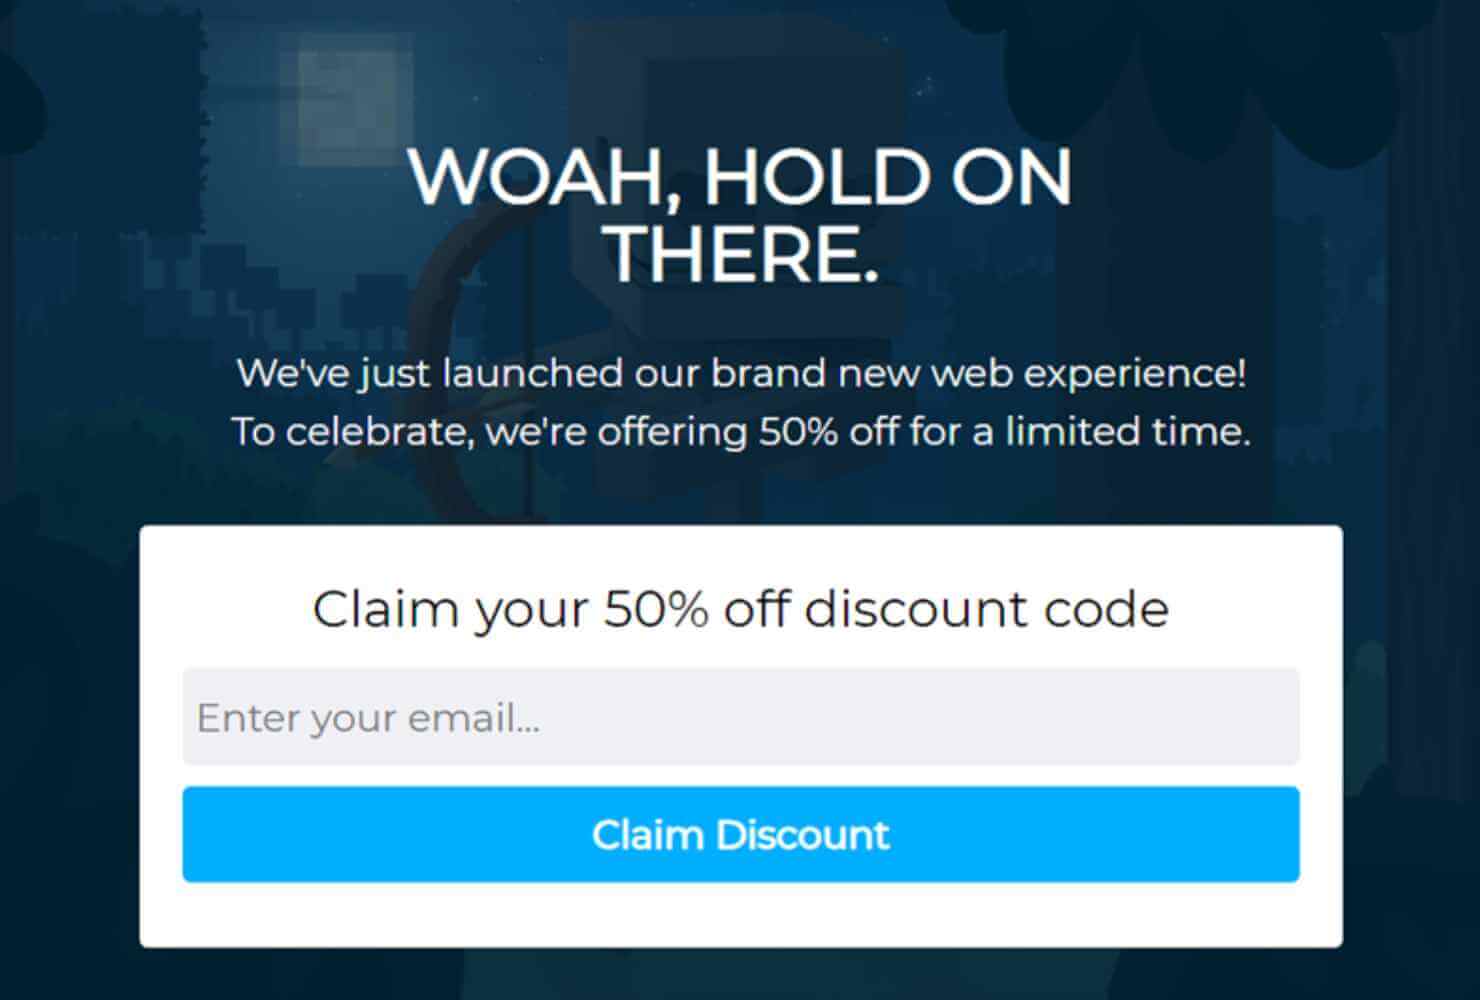 Shockbyte's exit-intent popup that says "WOAH, HOLD ON THERE. We've just launched our brand new web experience! To celebrate, we're offering 50% off for a limited time." It then asks for an email address to claim the discount.